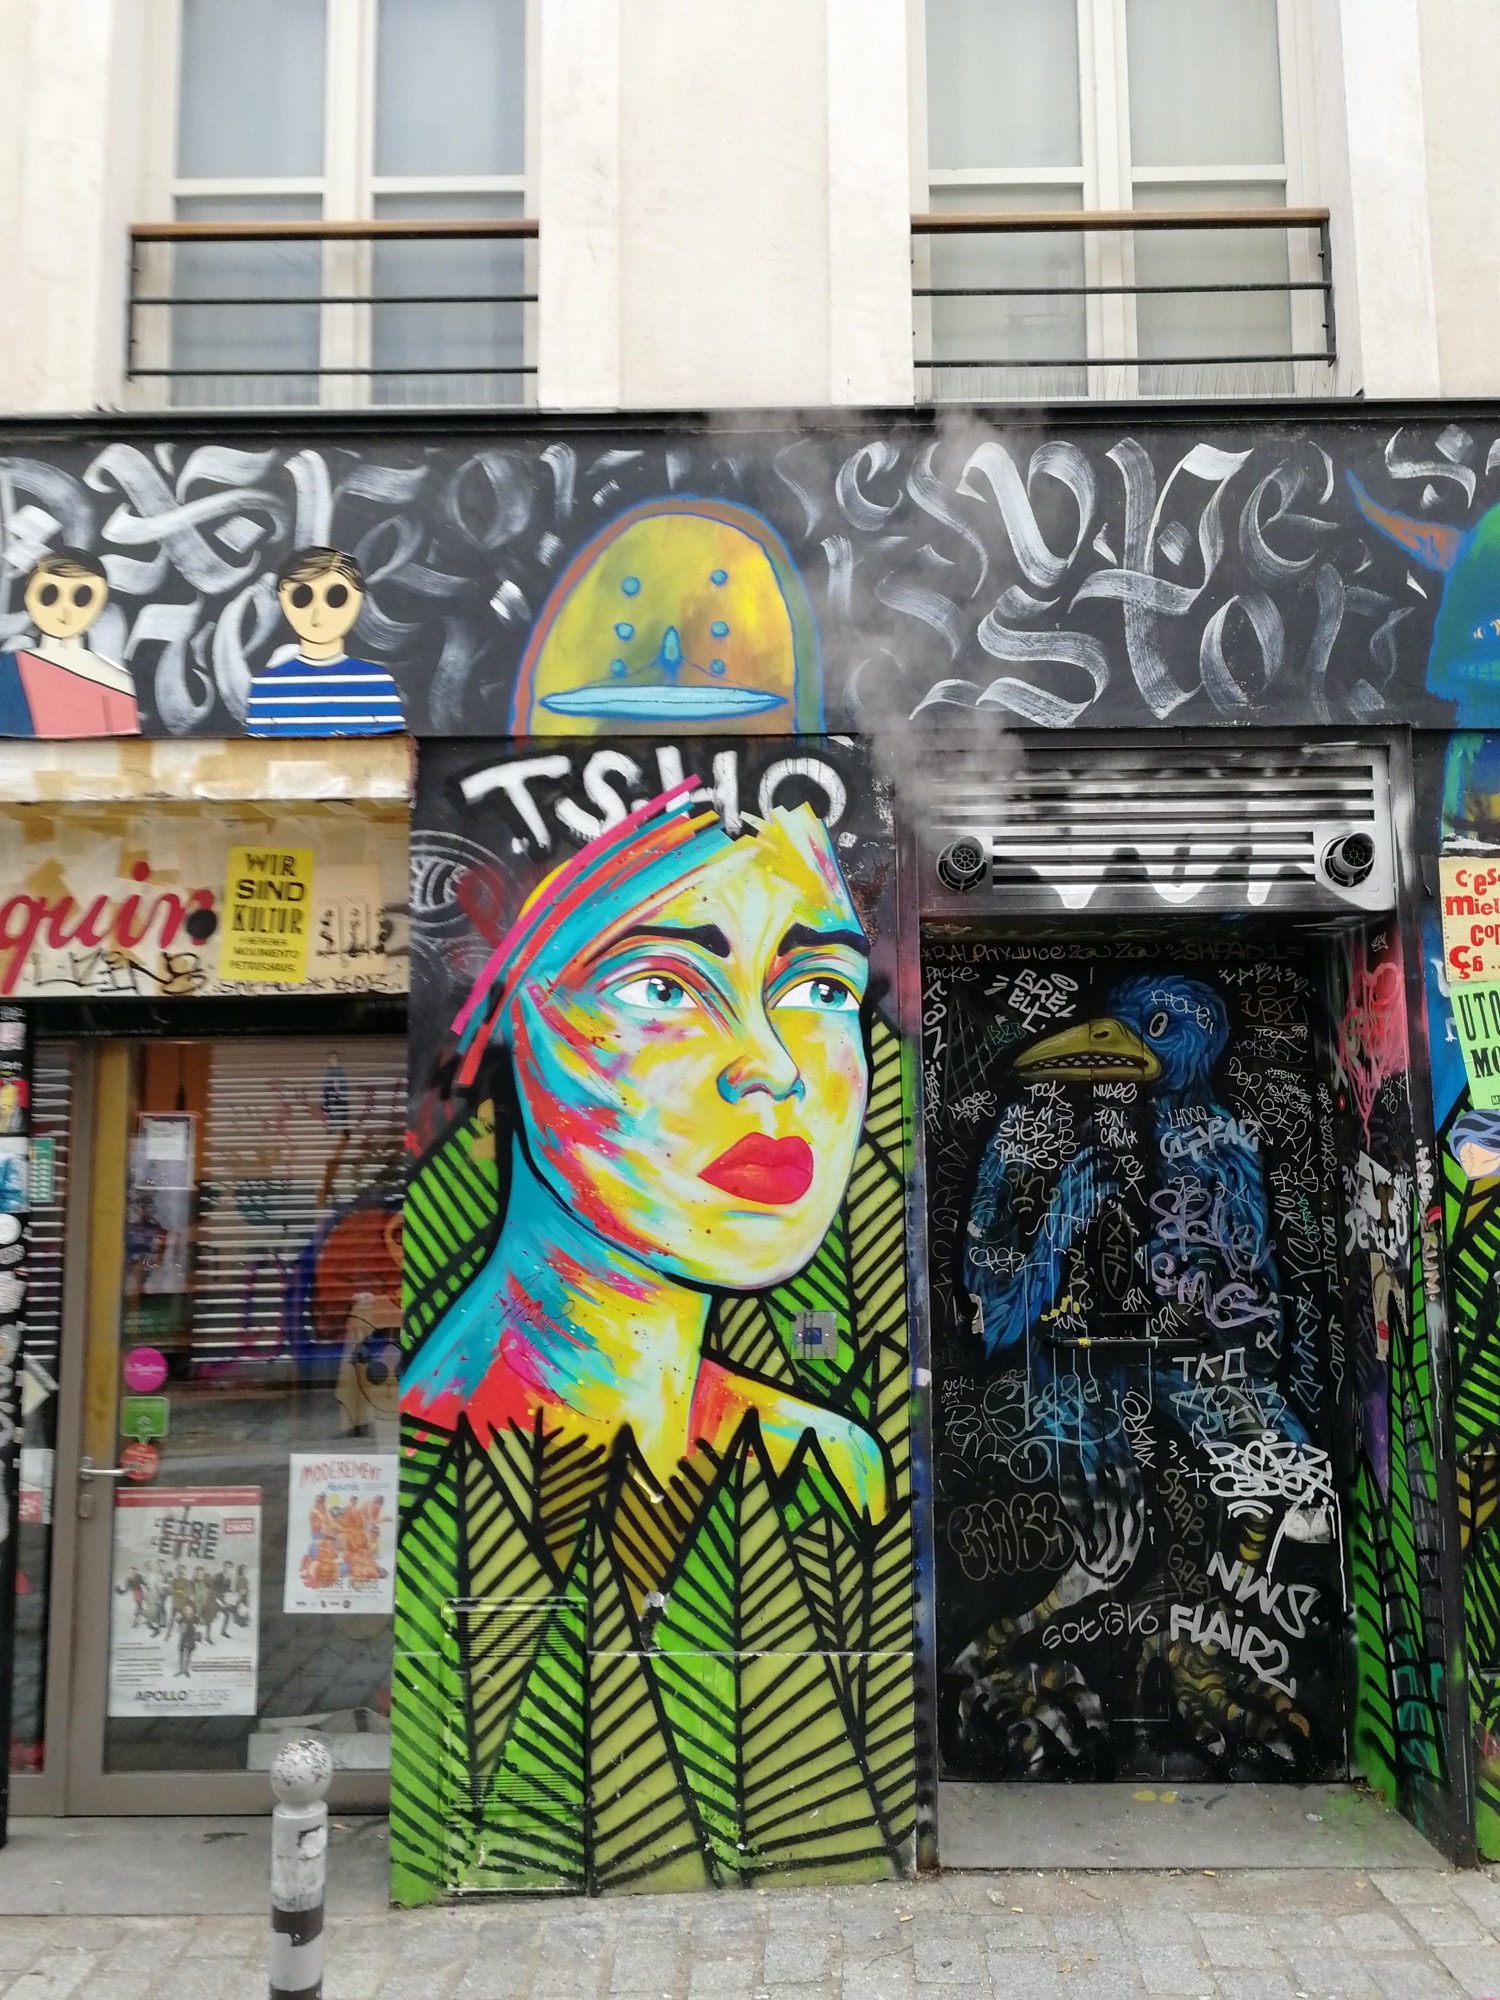 Graffiti 612  captured by Rabot in Paris France